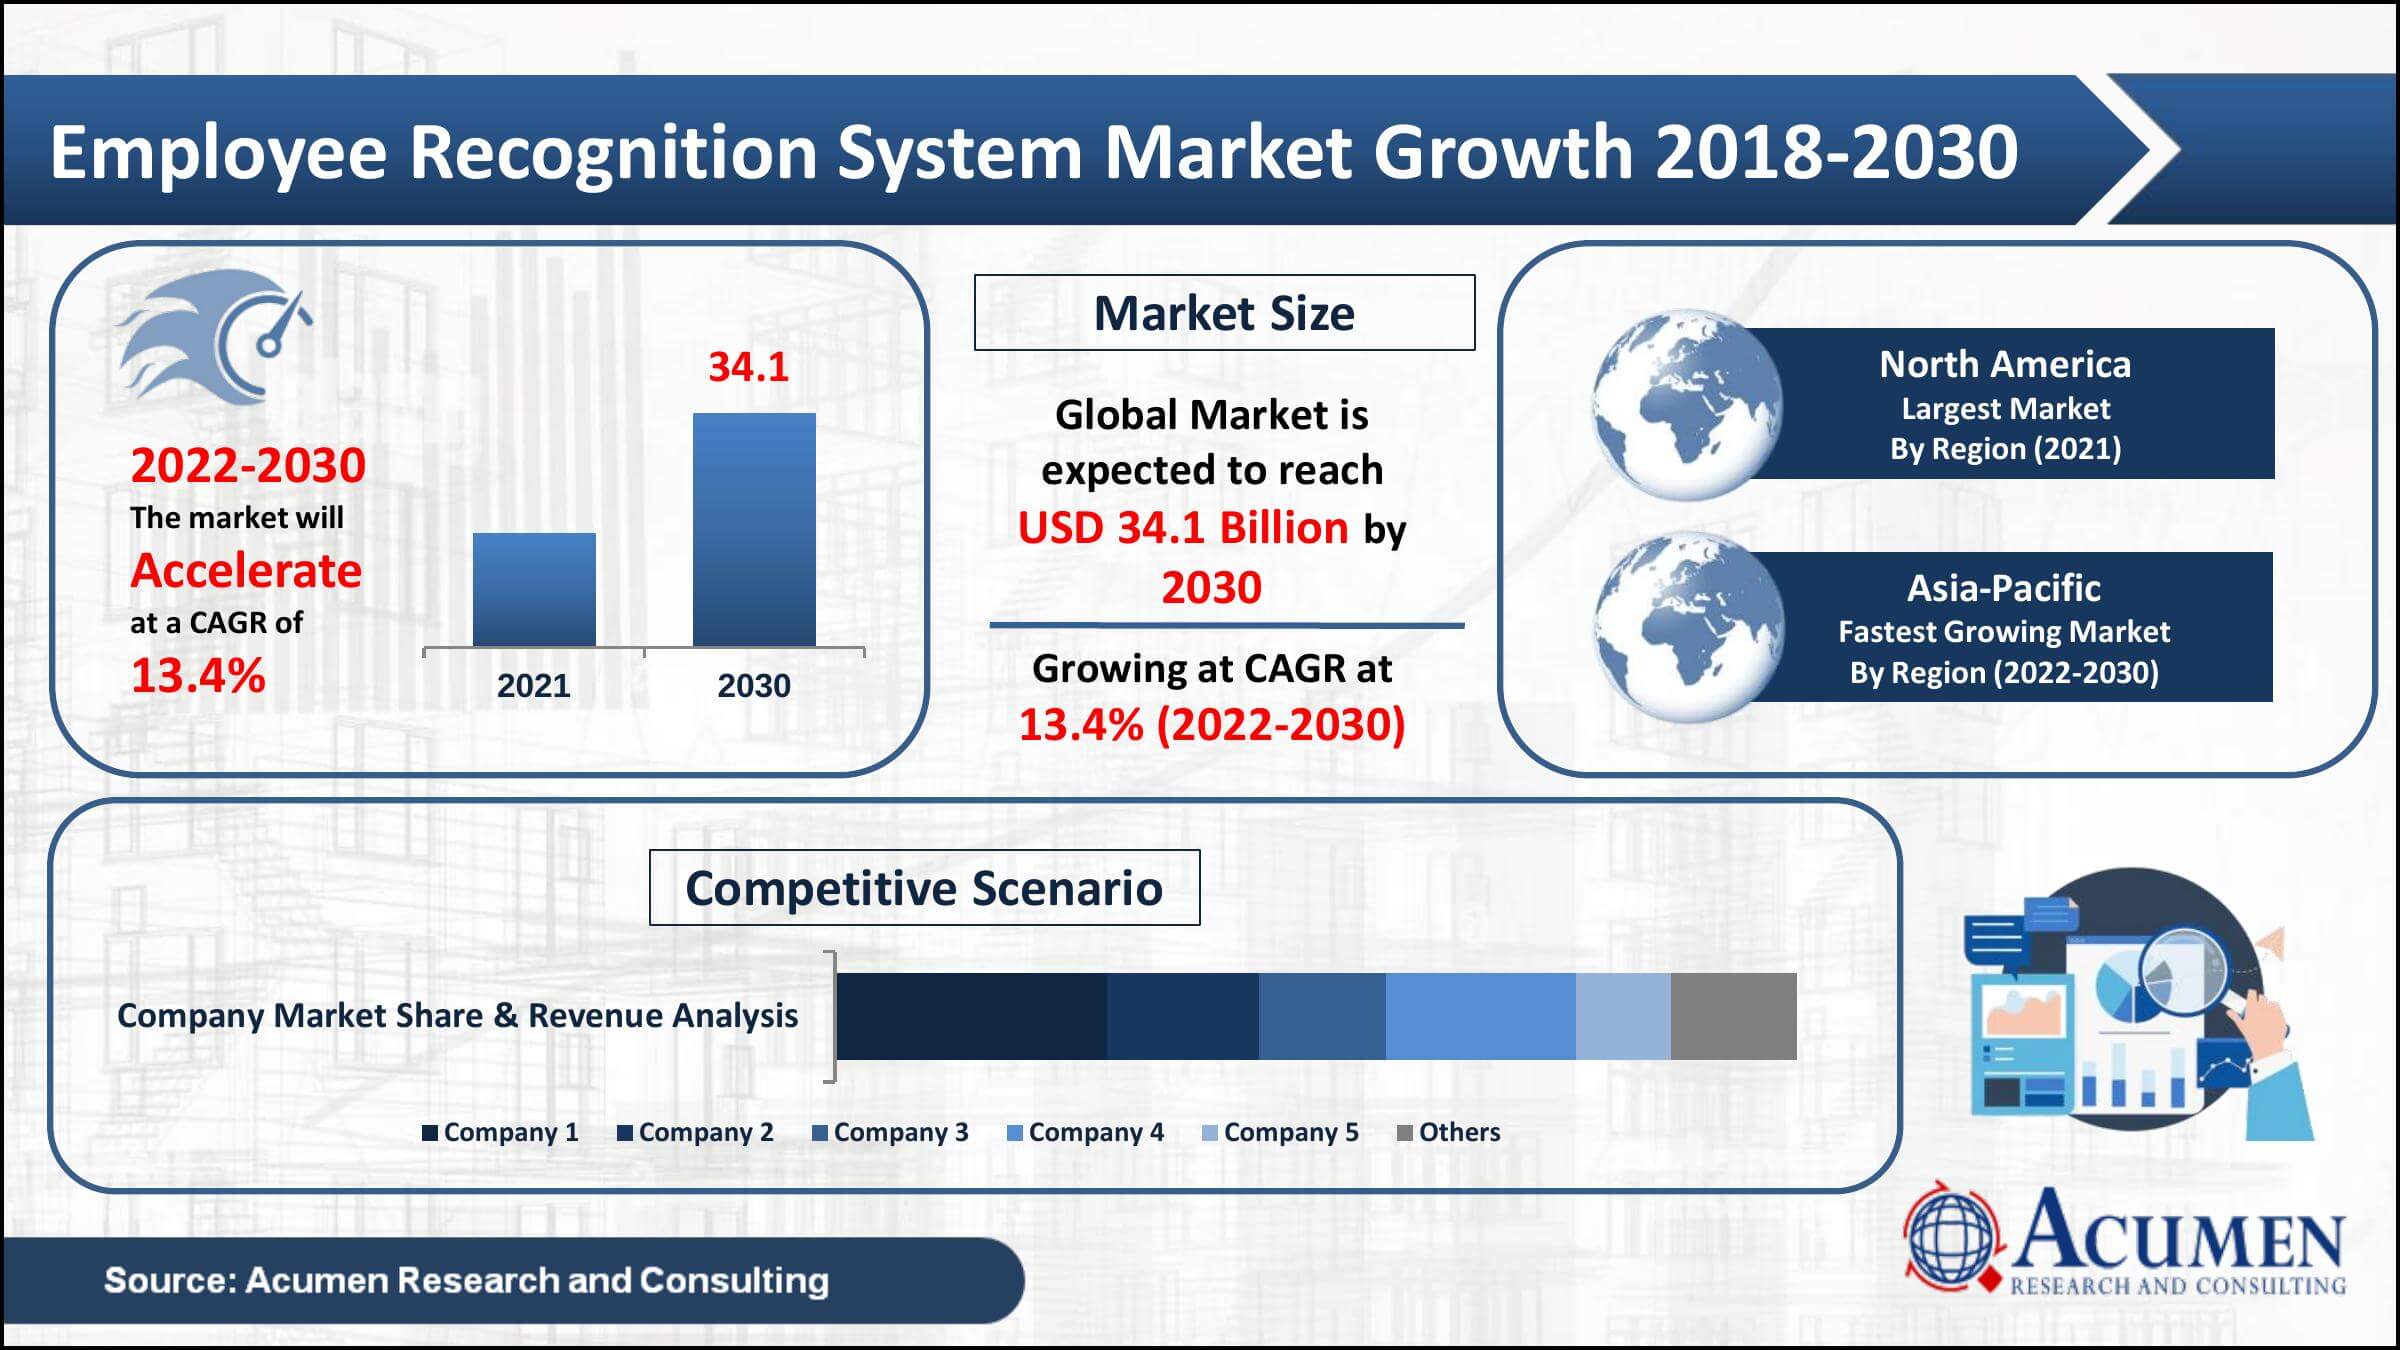 Employee Recognition System Market value to reach USD 34.1 Billion by 2030 at 13.4% CAGR as per Acumen Research and Consulting